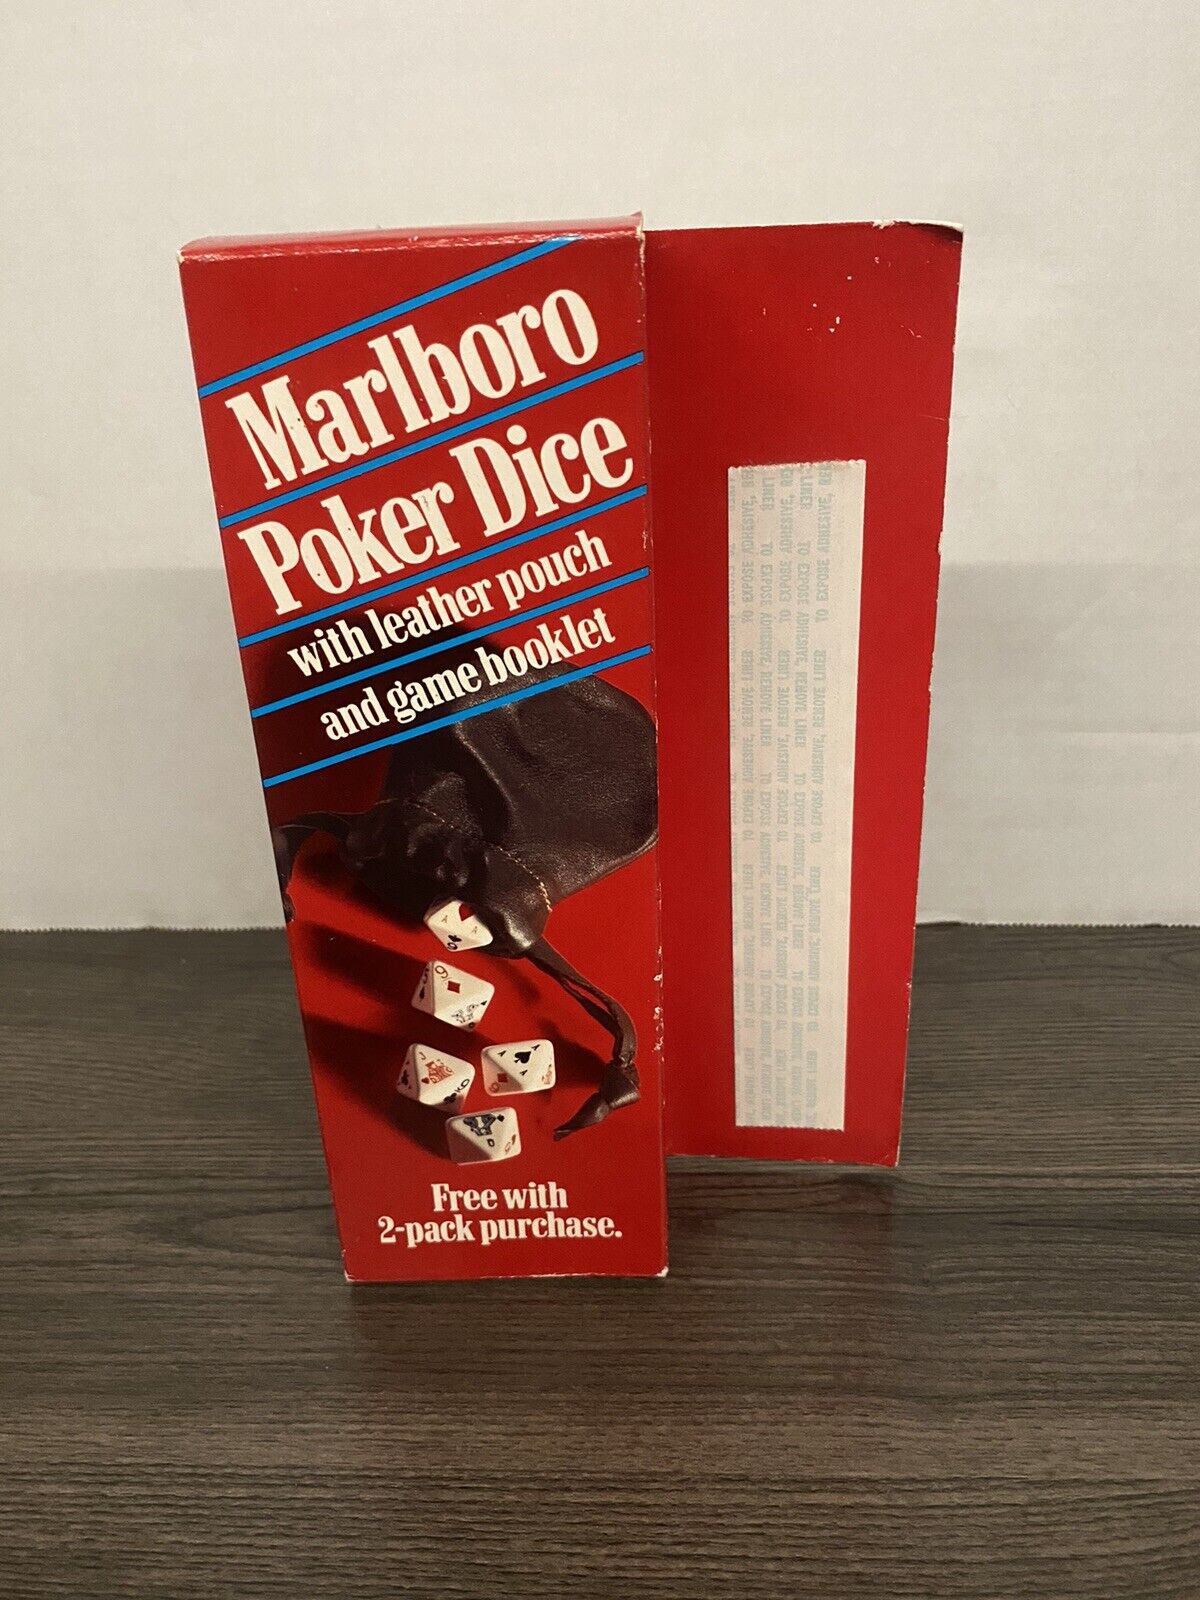 Vintage New in Box 1990 Marlboro Poker Dice Leather Pouch & Game Booklet New